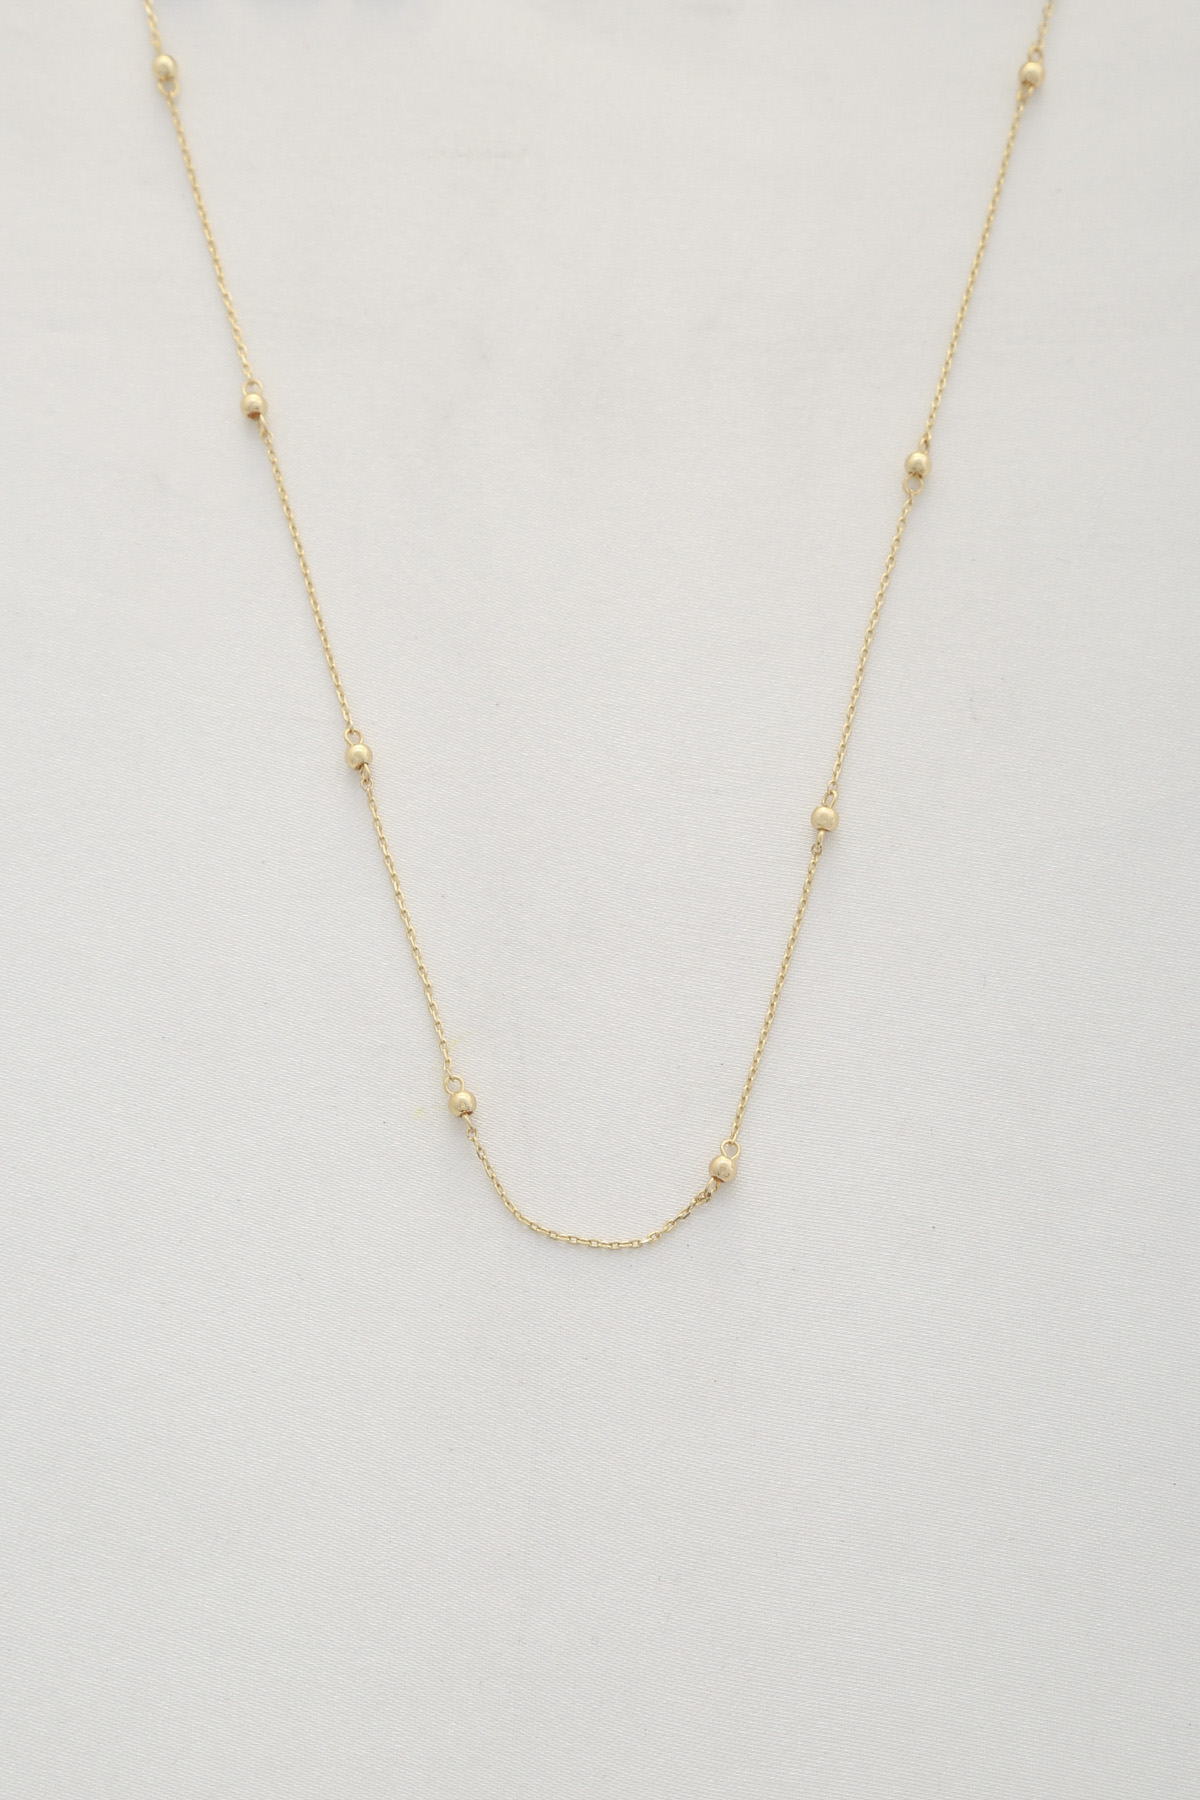 DAINTY BALL BEAD STATION NECKLACE